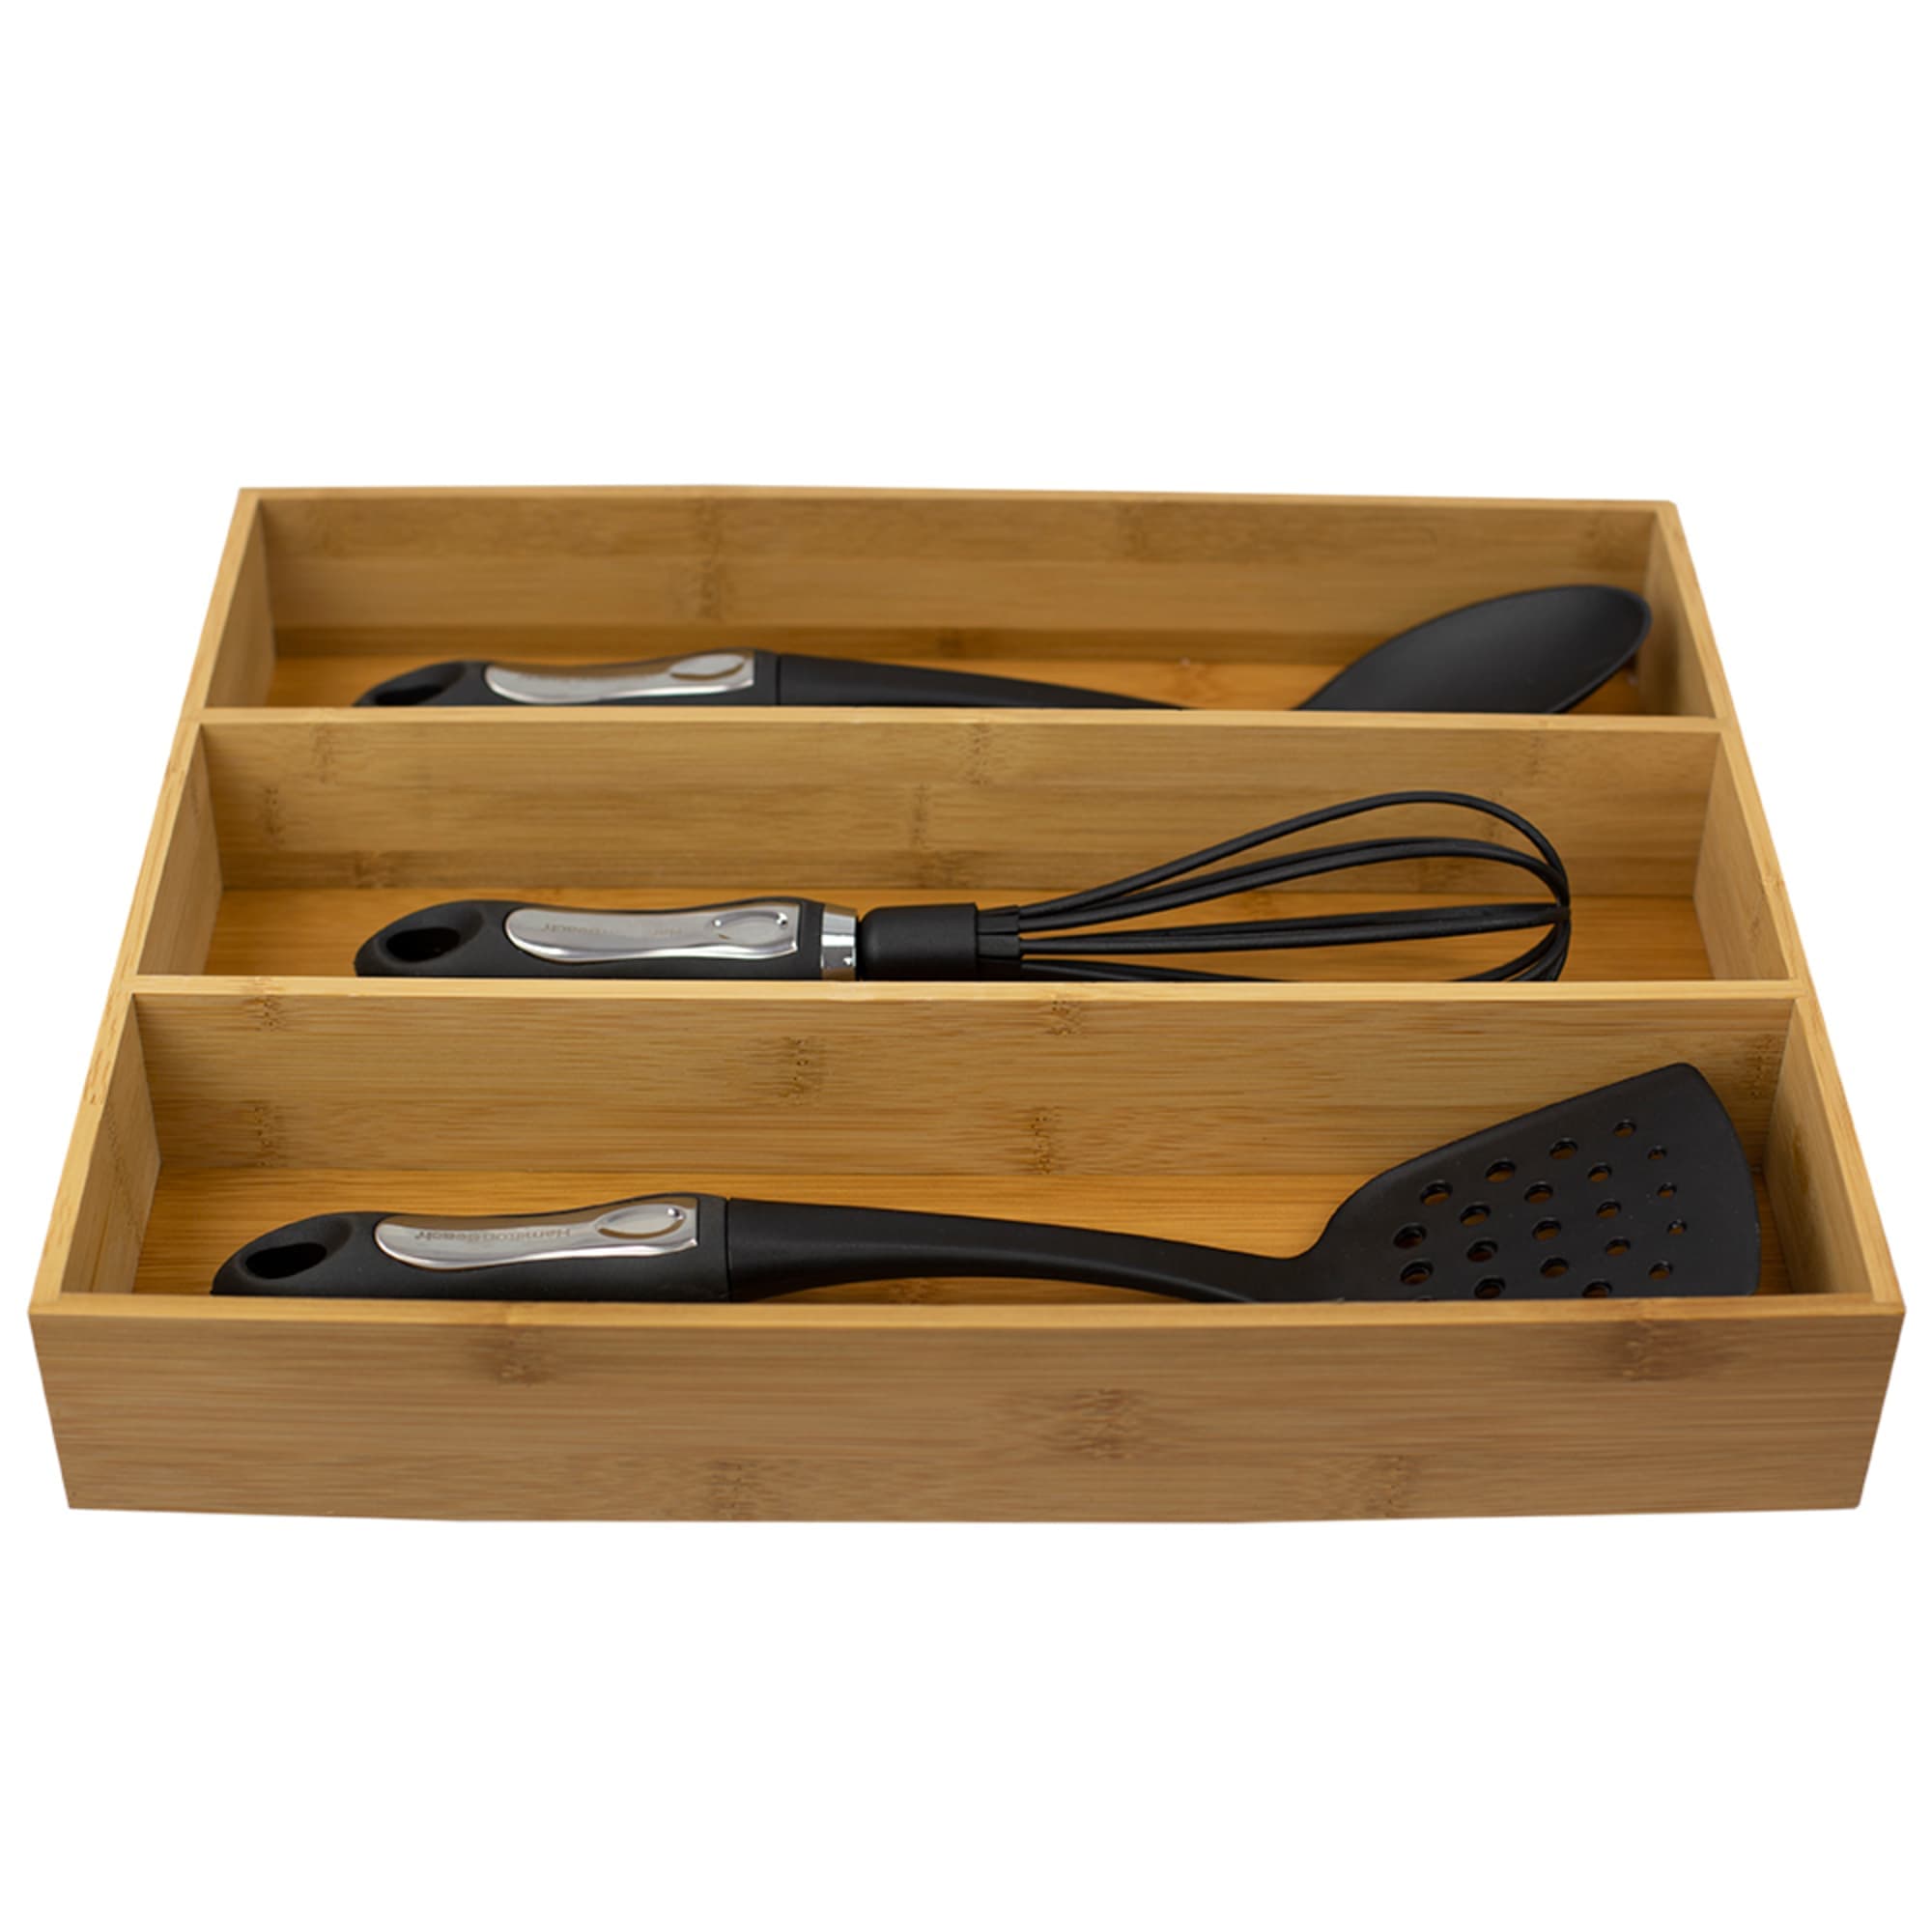 Home Basics Three Compartment Bamboo Organization, Natural $10 EACH, CASE PACK OF 6